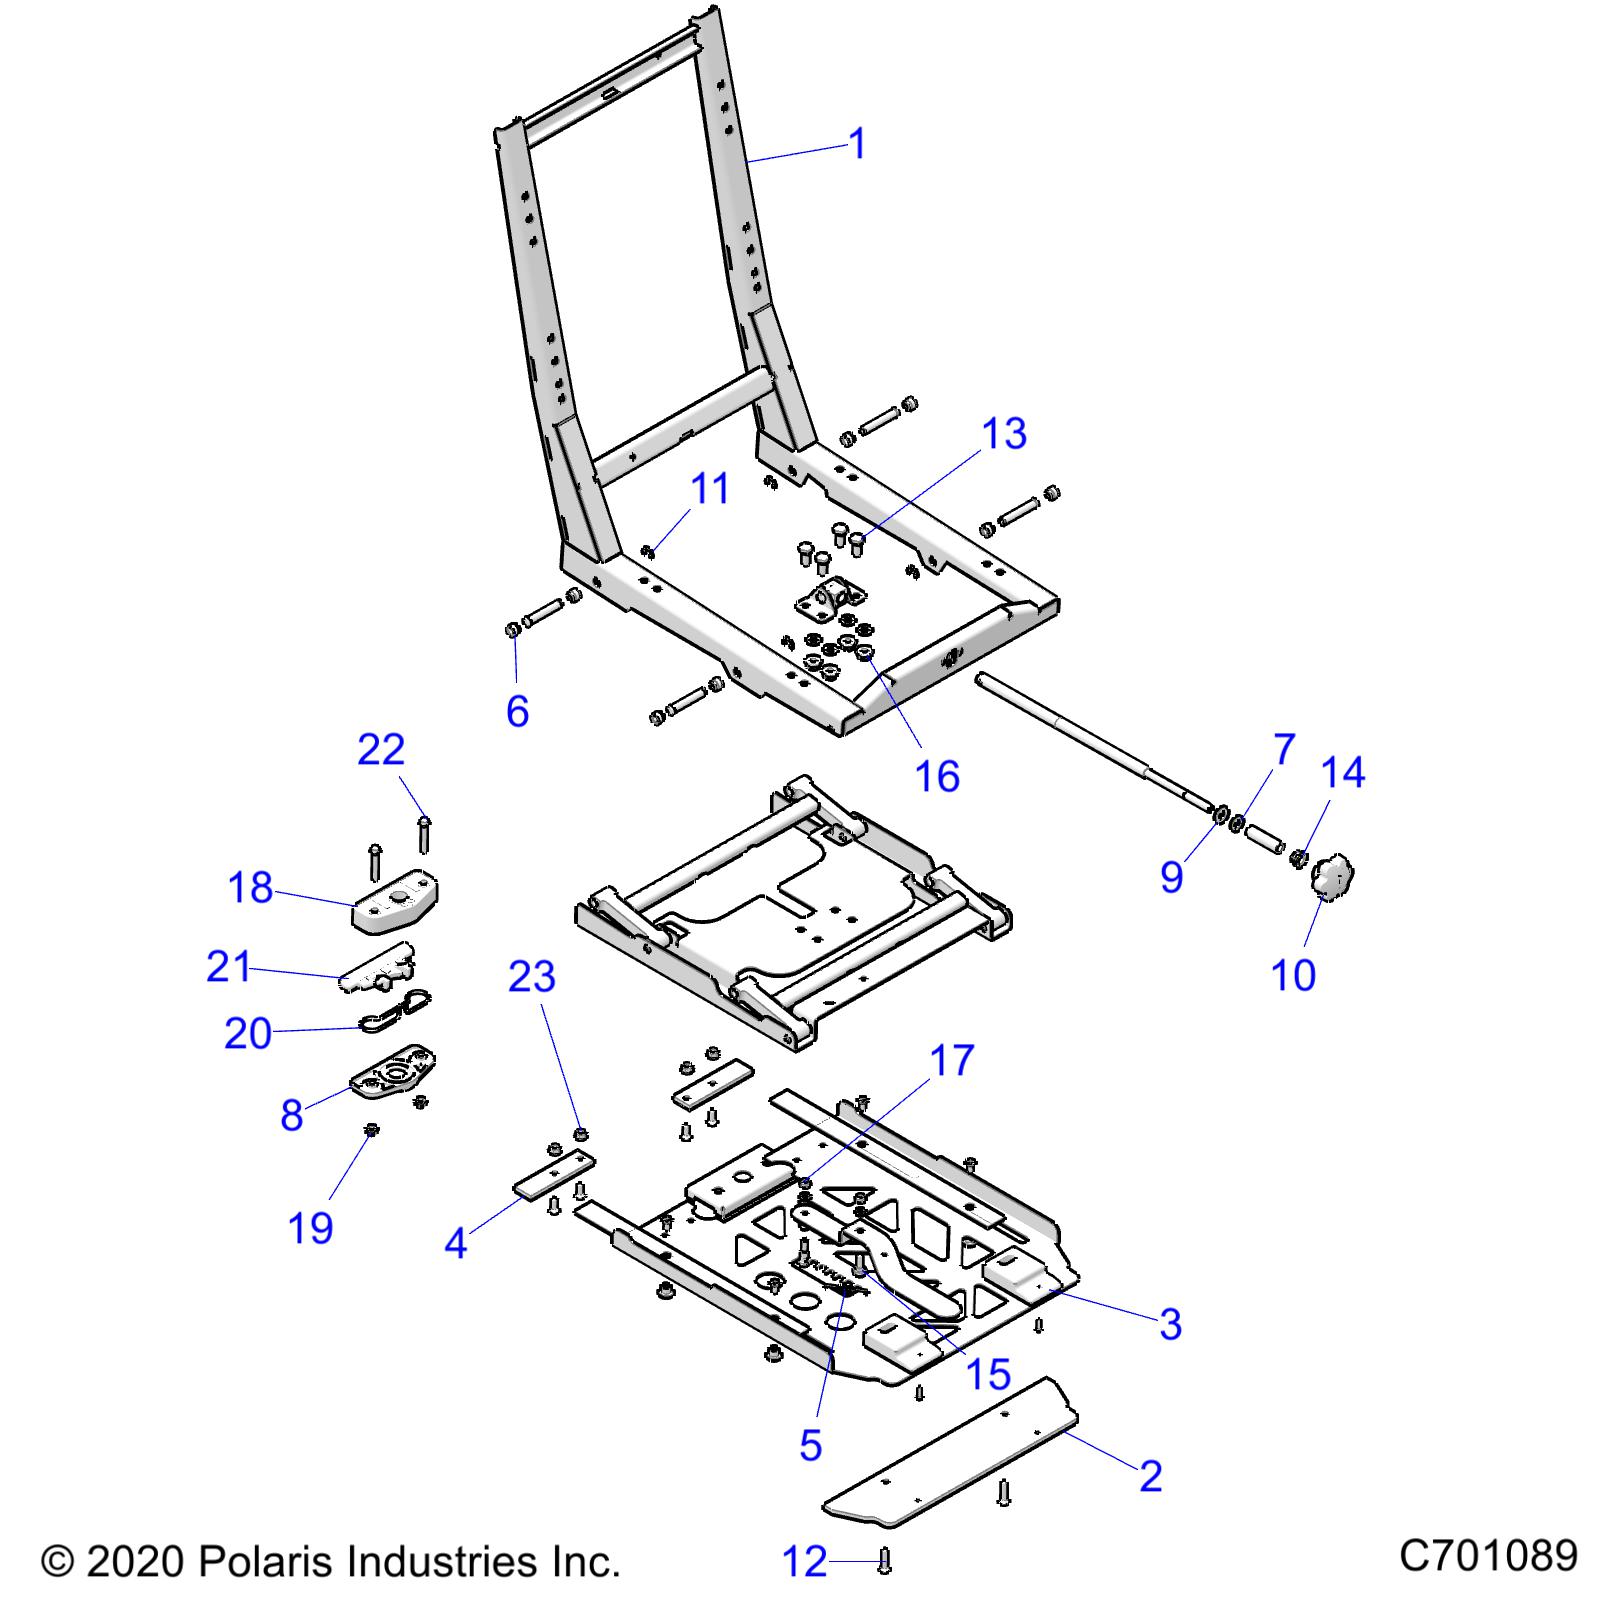 Part Number : 5453437 LEVER-LATCH SEAT